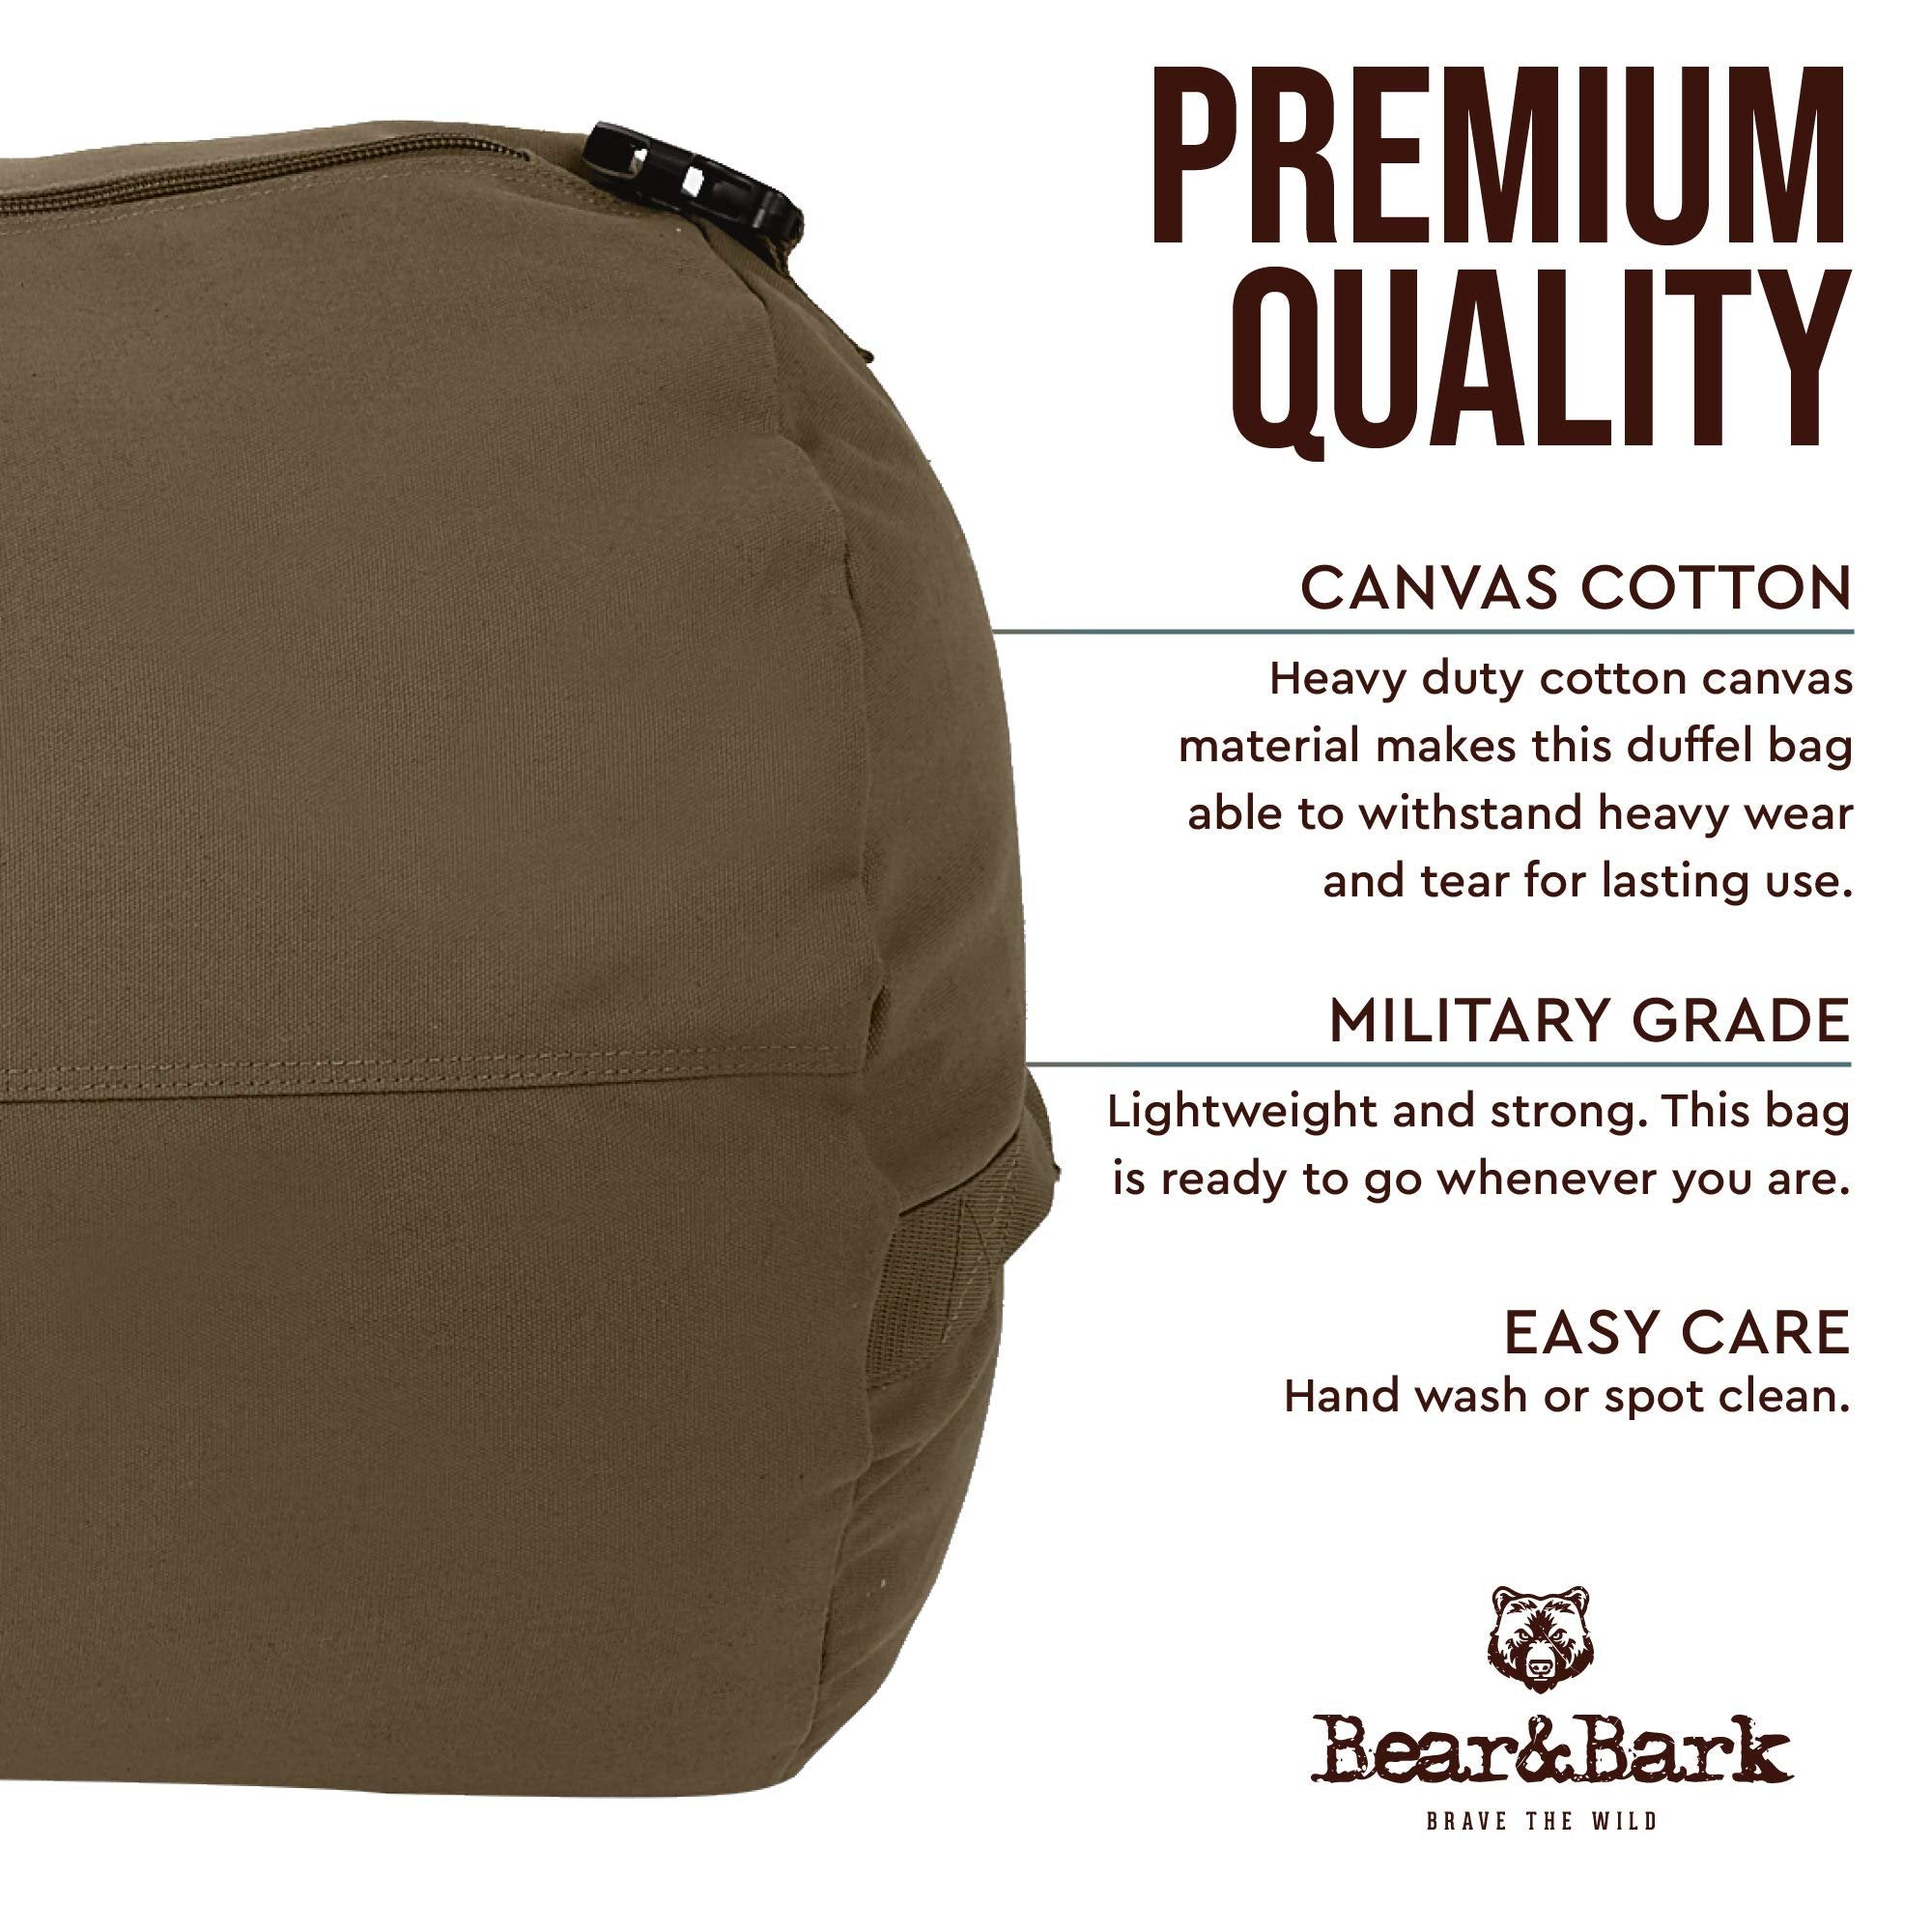 Large Duffle Bag - Military Green 32”x18” - 133.4L - Canvas Military and Army Cargo Style Travel Luggage - Carryall Duffle for Men and Women - Hiking, Student, Backpacking, Storage Shoulder Tote Bag